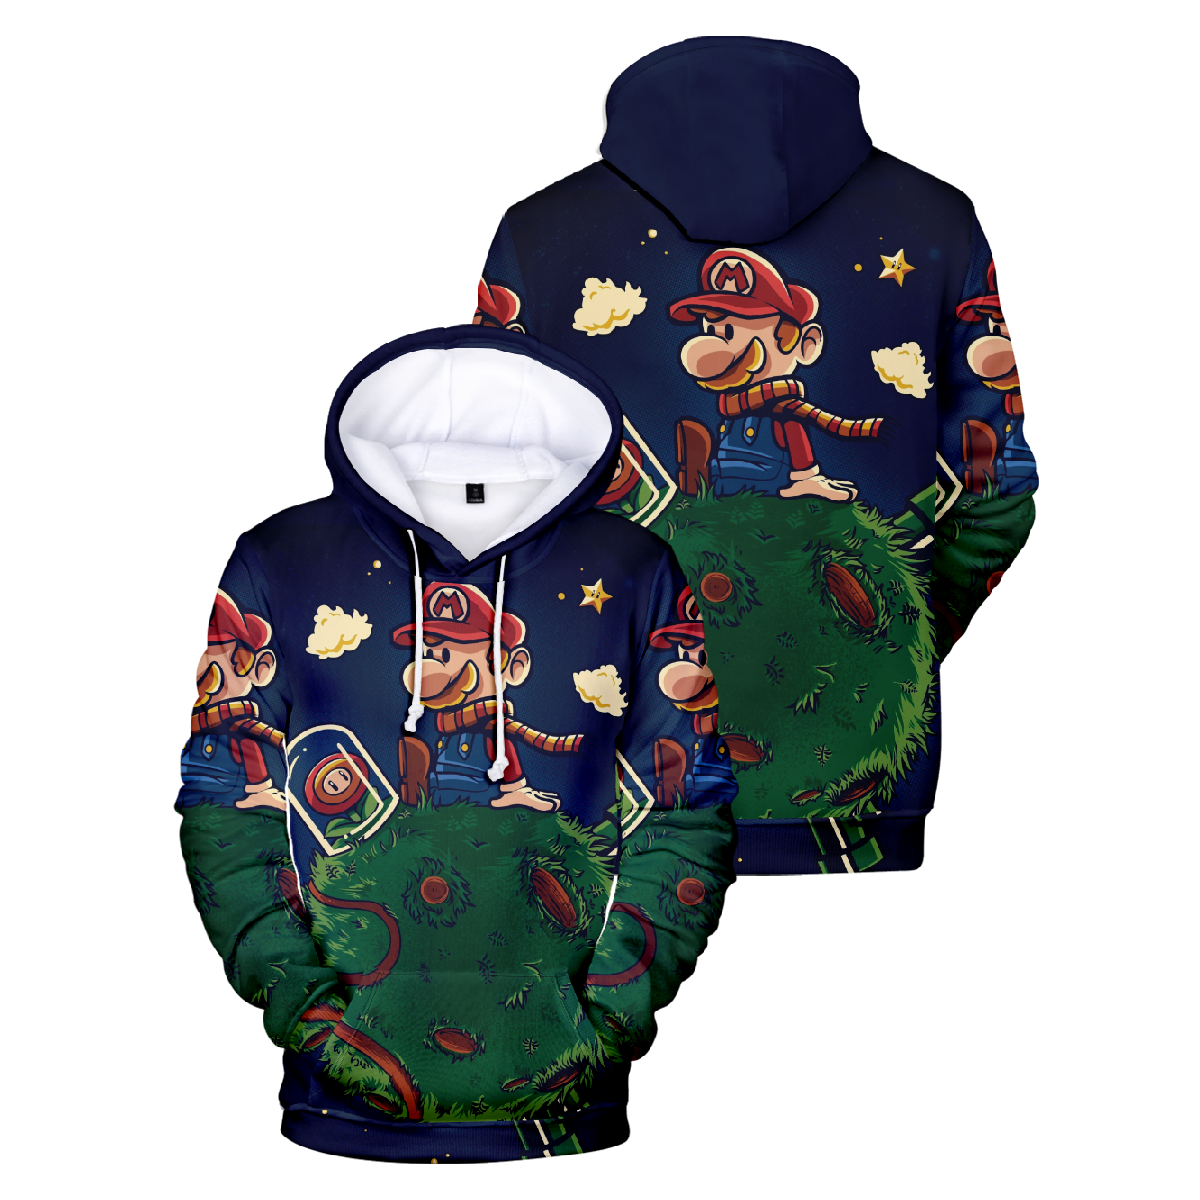 Kids Super Mario Pullover Allover Print Hoodie Unisex Sweater Ideal Gift